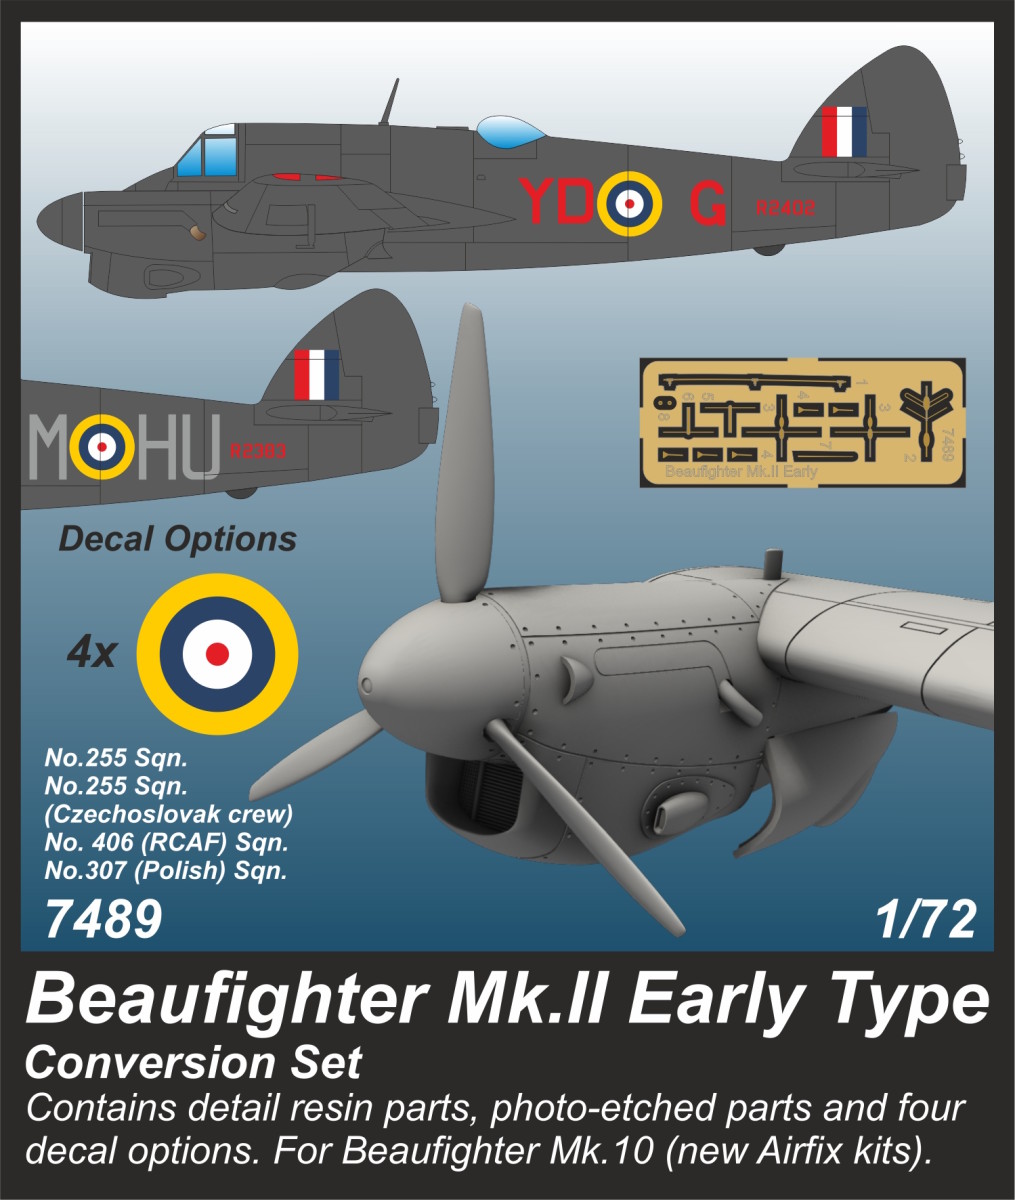 1/72 Beaufighter Mk.II Early Type Conversion set